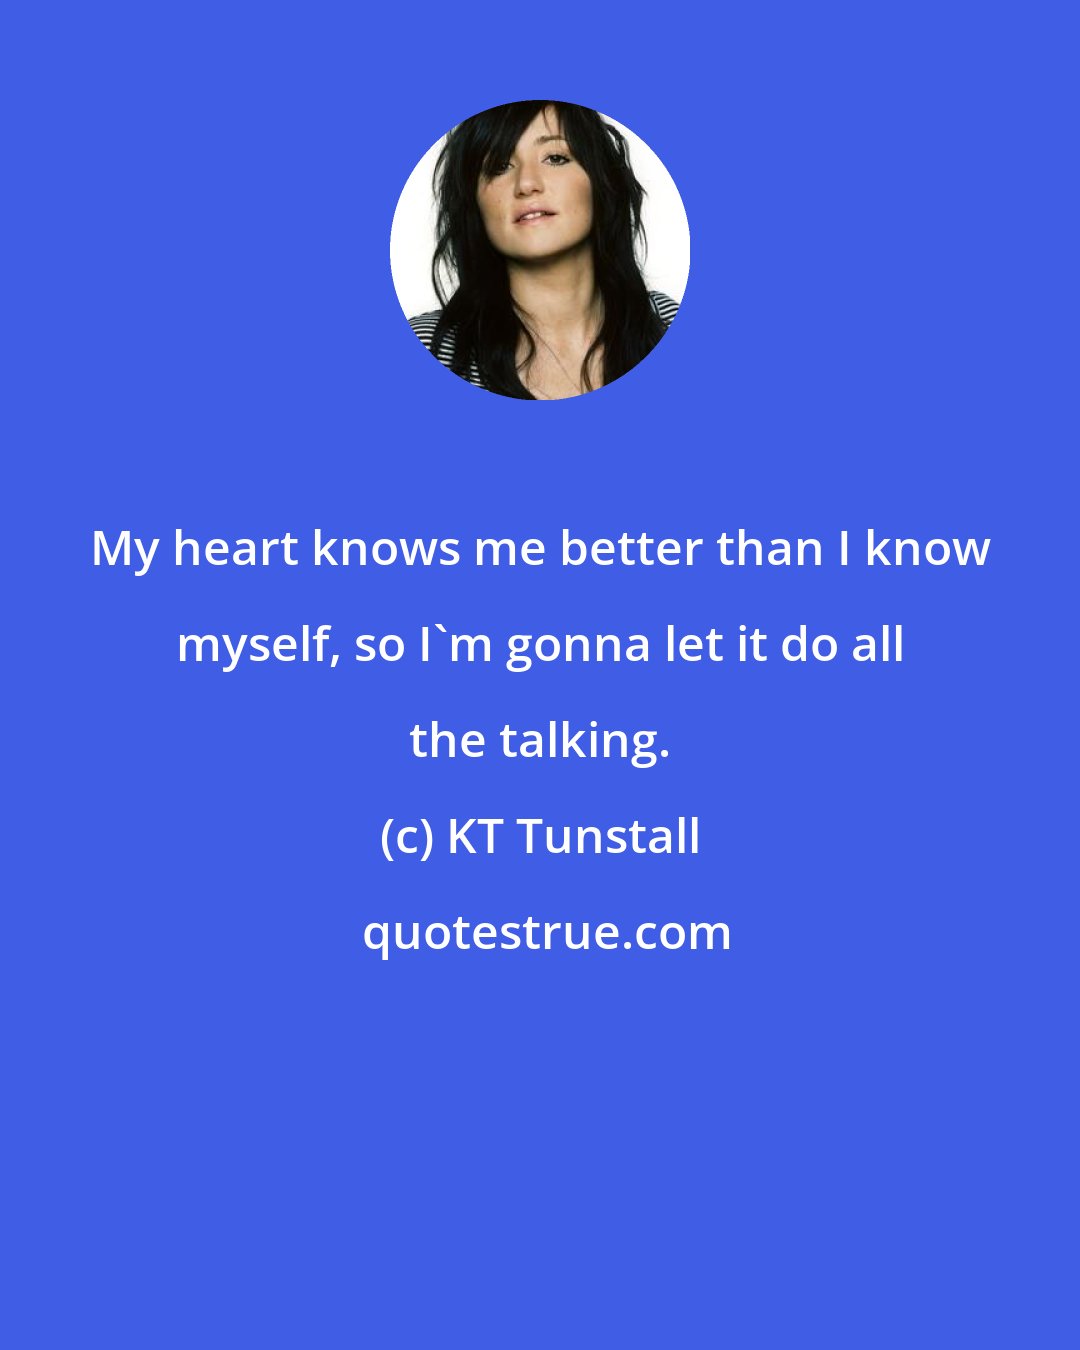 KT Tunstall: My heart knows me better than I know myself, so I'm gonna let it do all the talking.